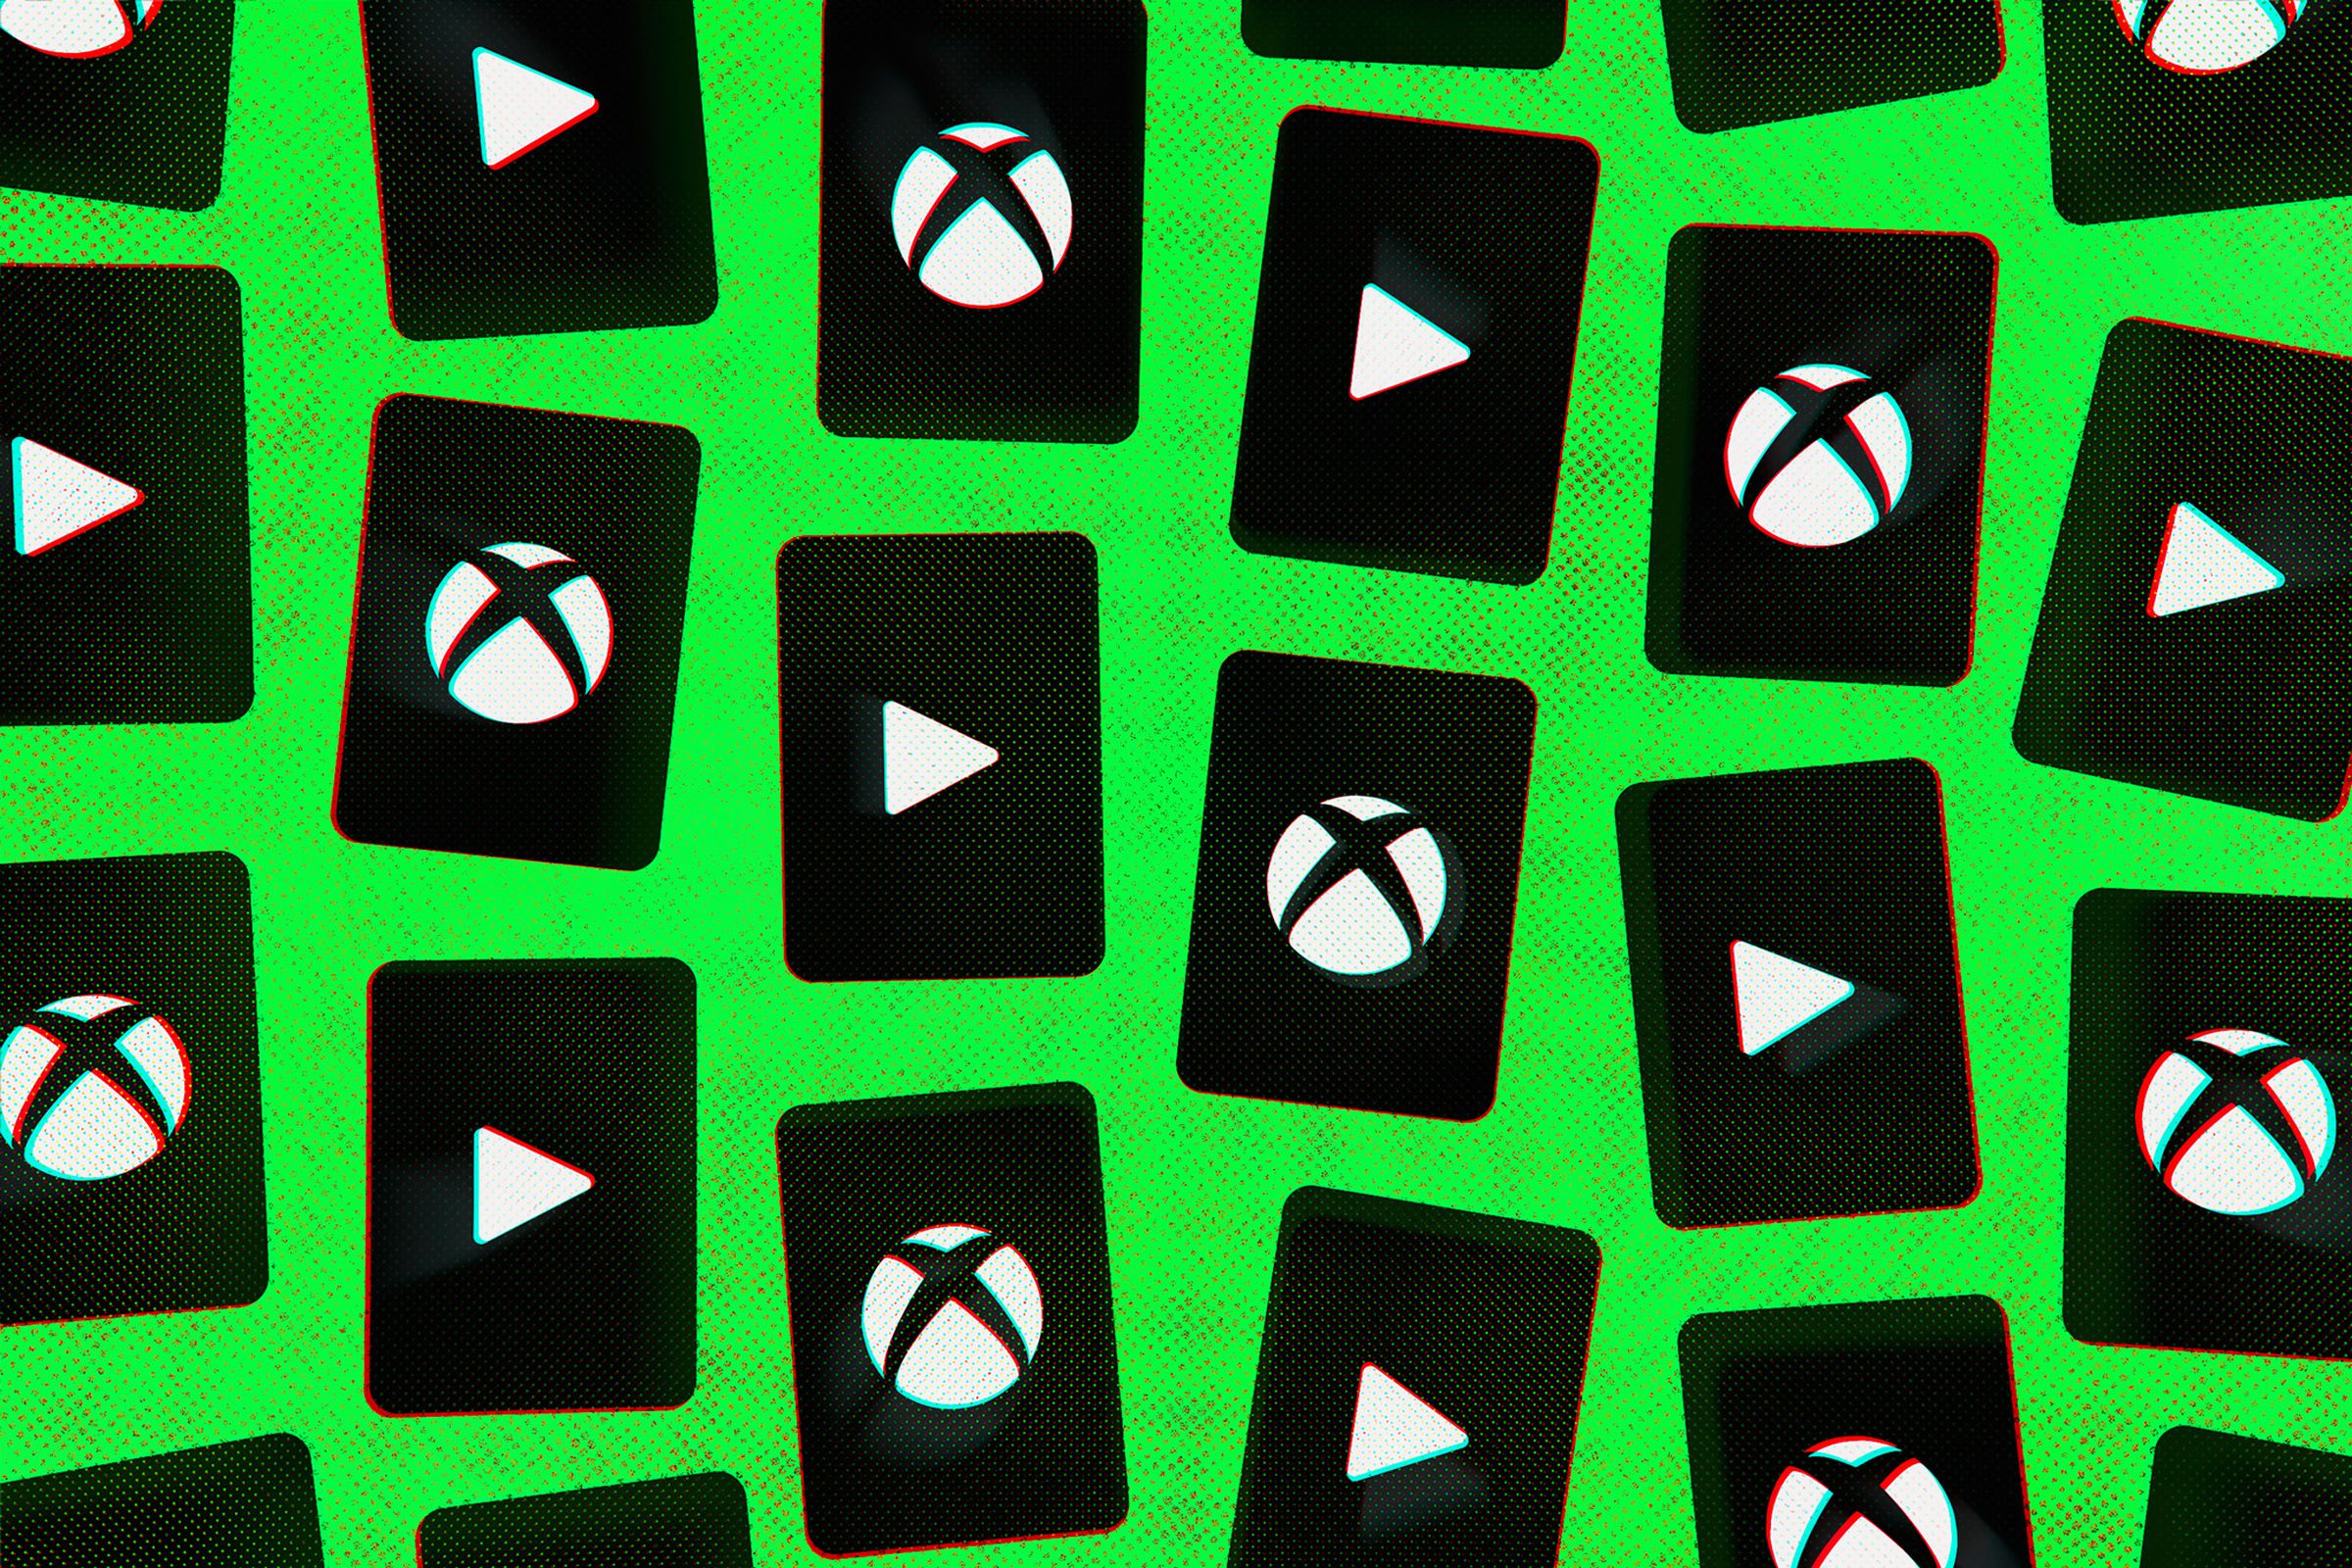 Illustration of Xbox logos on phones and tablets